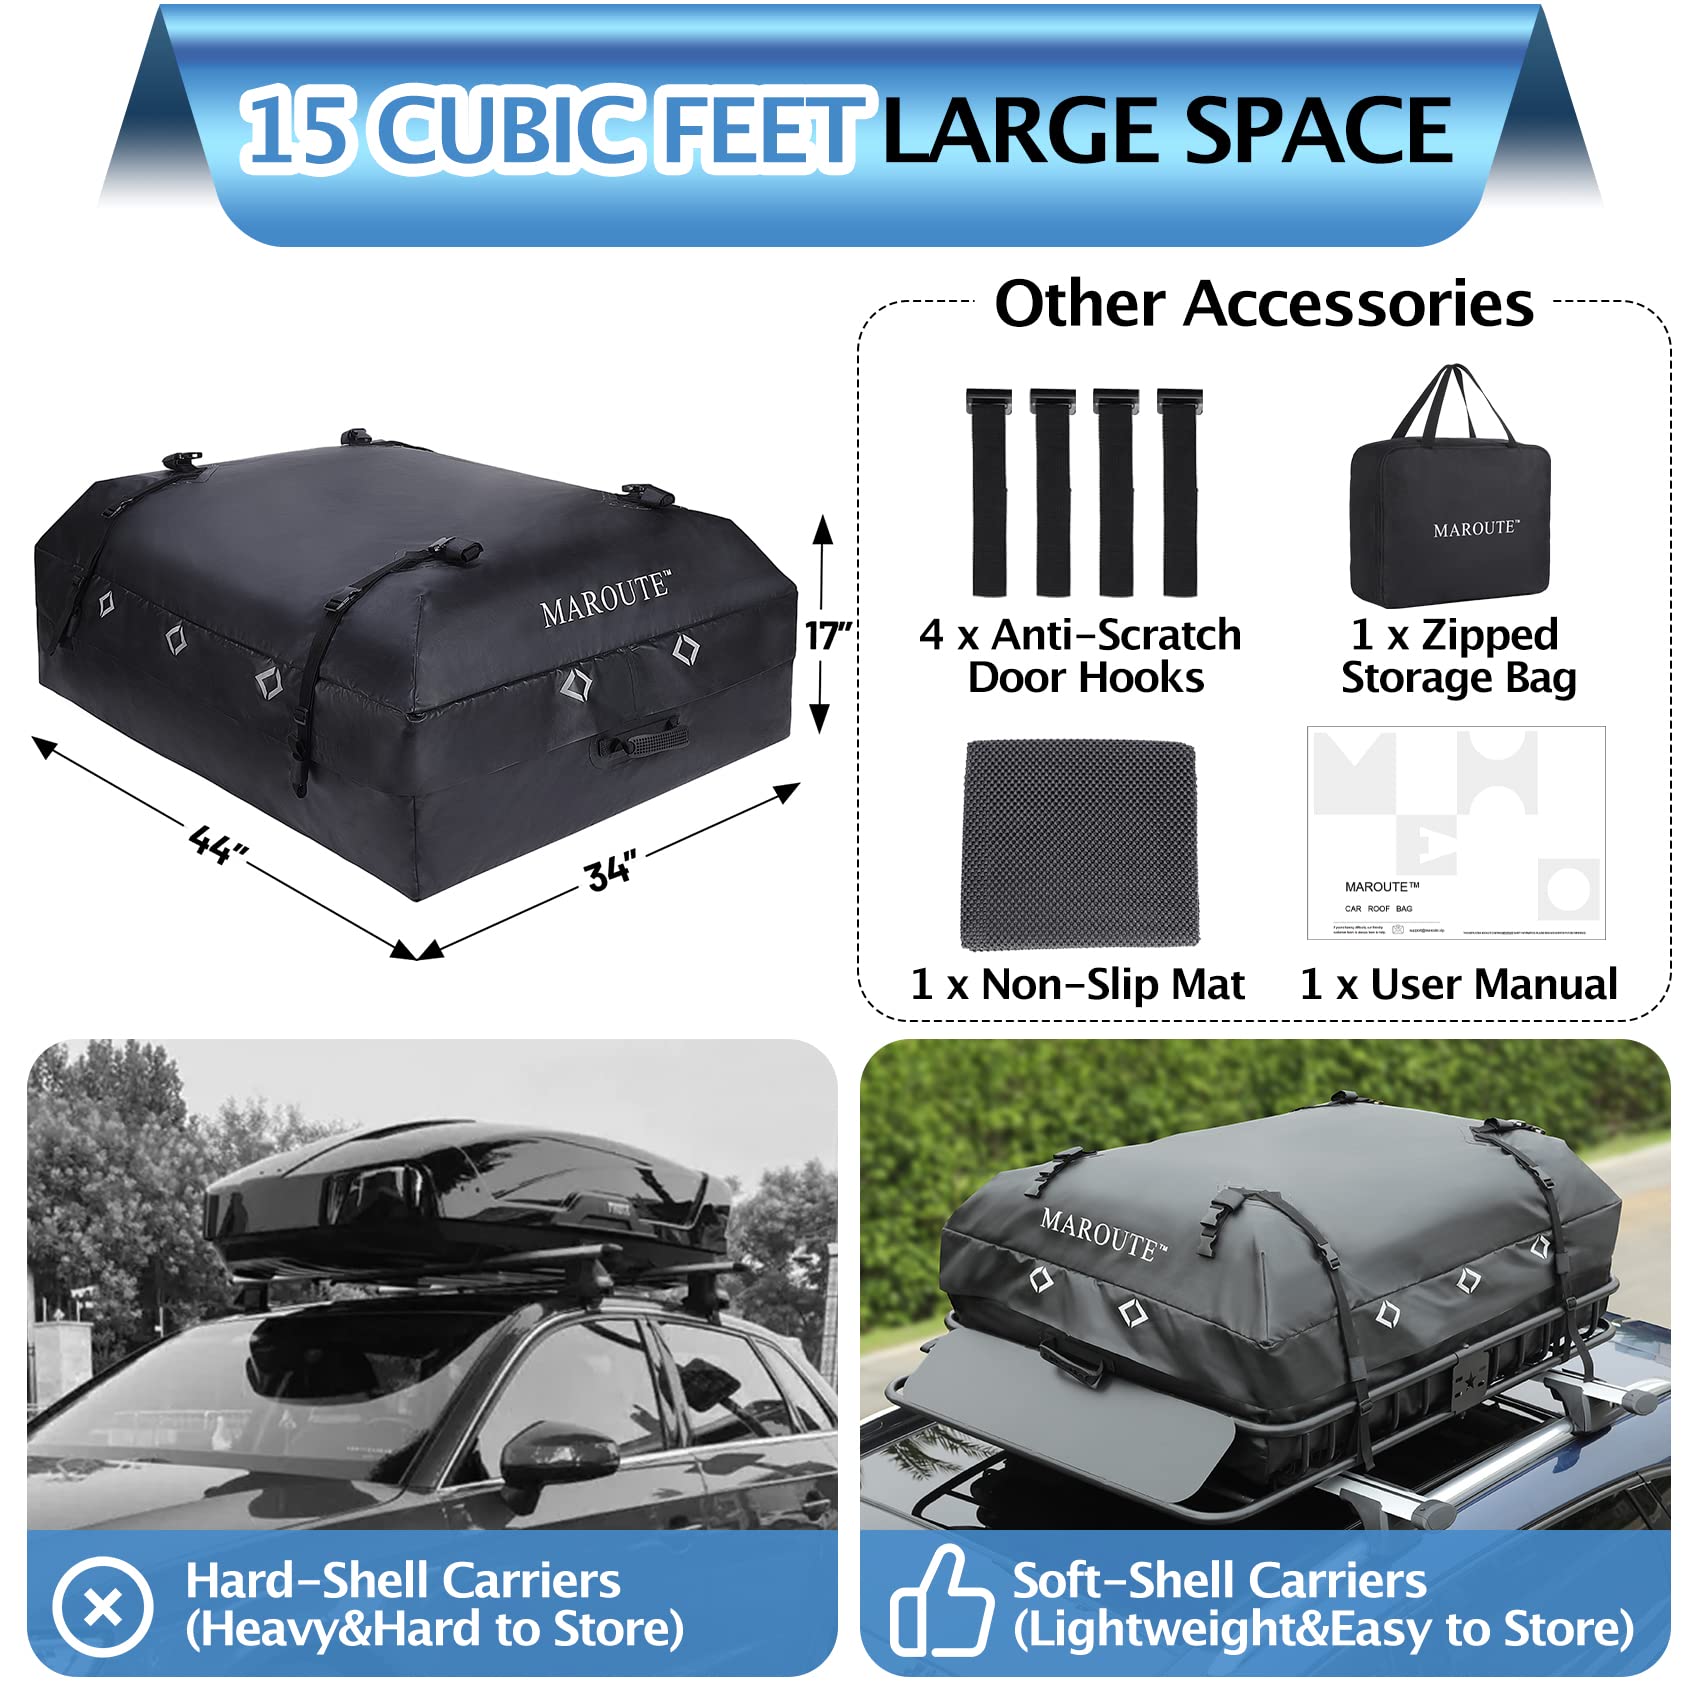 Rooftop Cargo Carrier Bag, 15 Cubic Feet Heavy Duty Waterproof Rooftop Car Bag,Fits for All Cars with/Without Rack,8 Door Hooks,Storage Bag